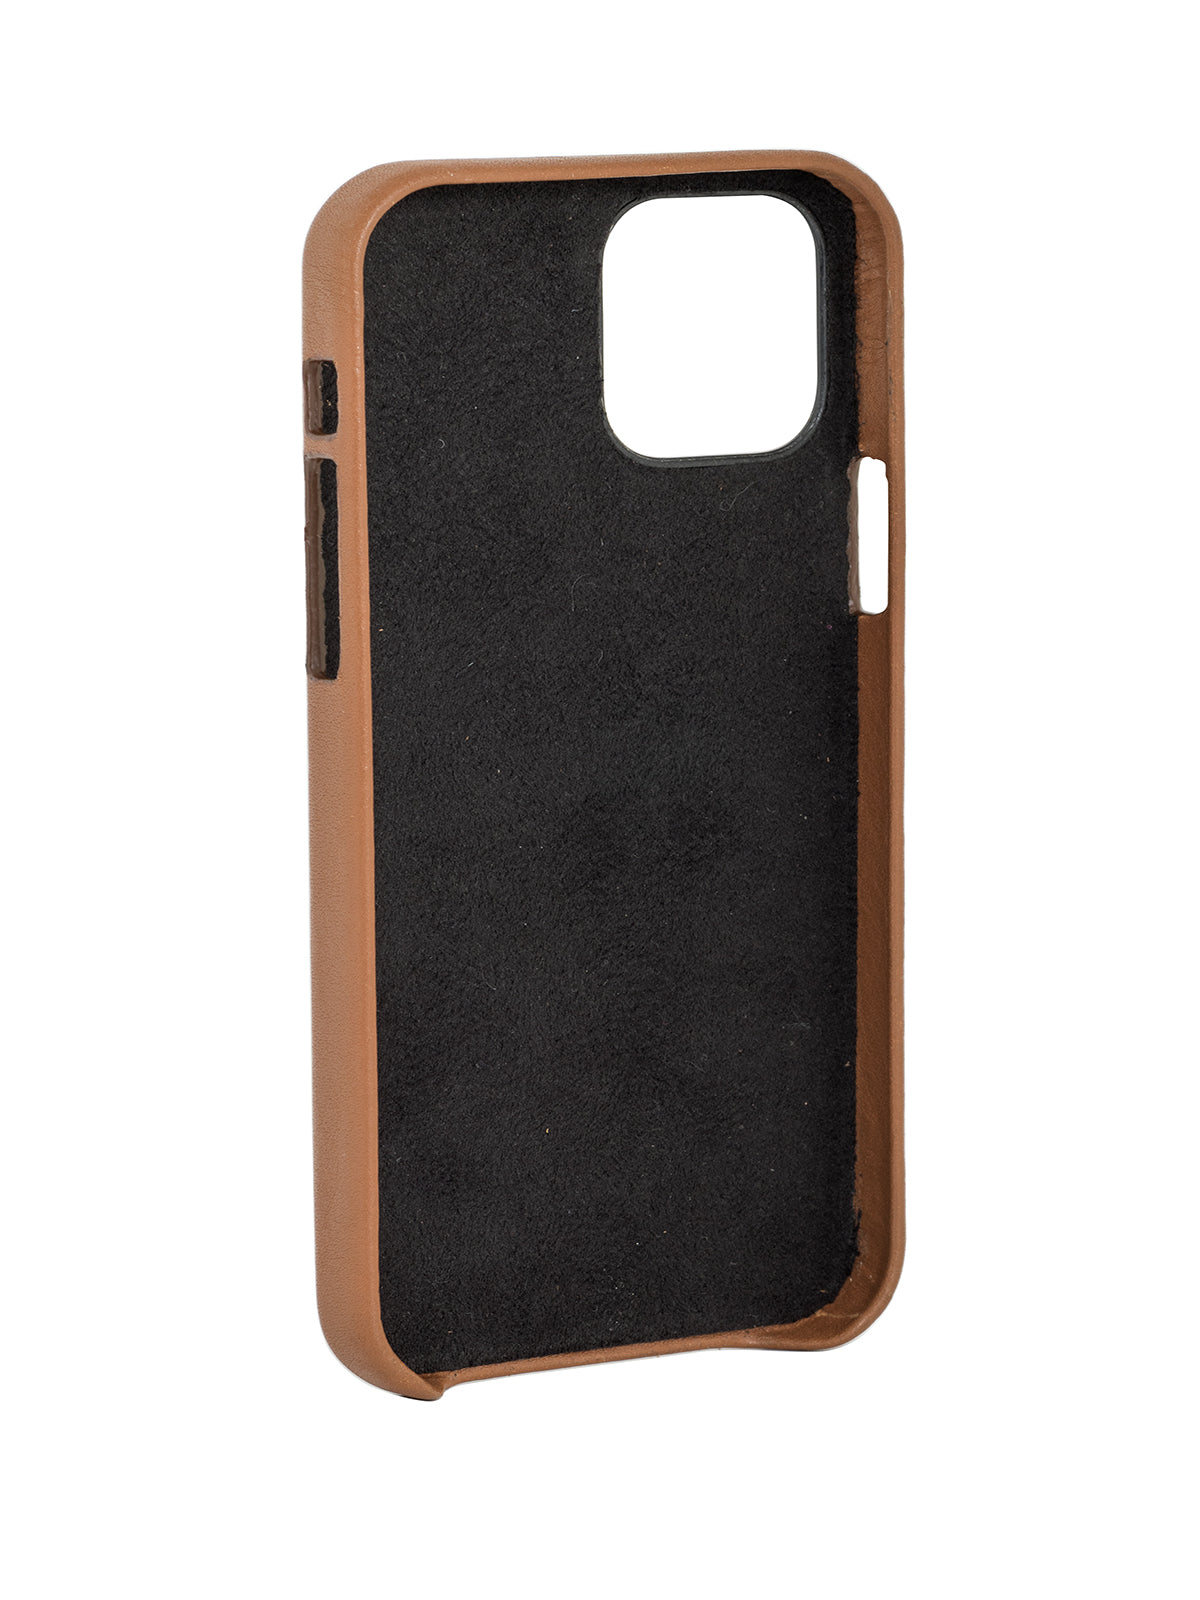 Genuine Leather Cover For iPhone 12 Pro Max